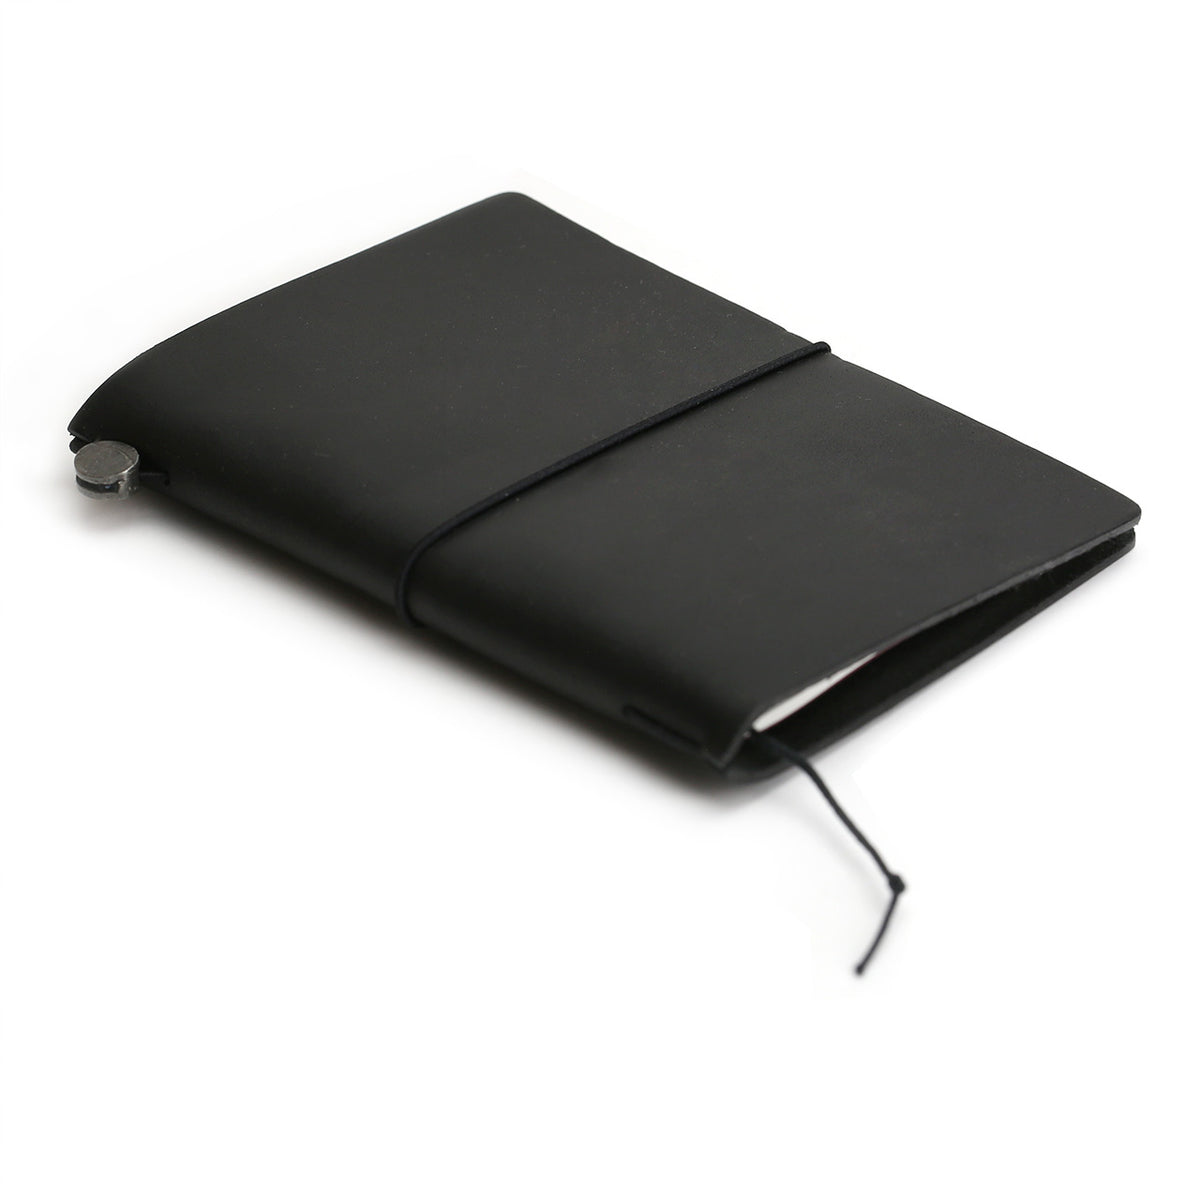 Black Passport sized notebook cover